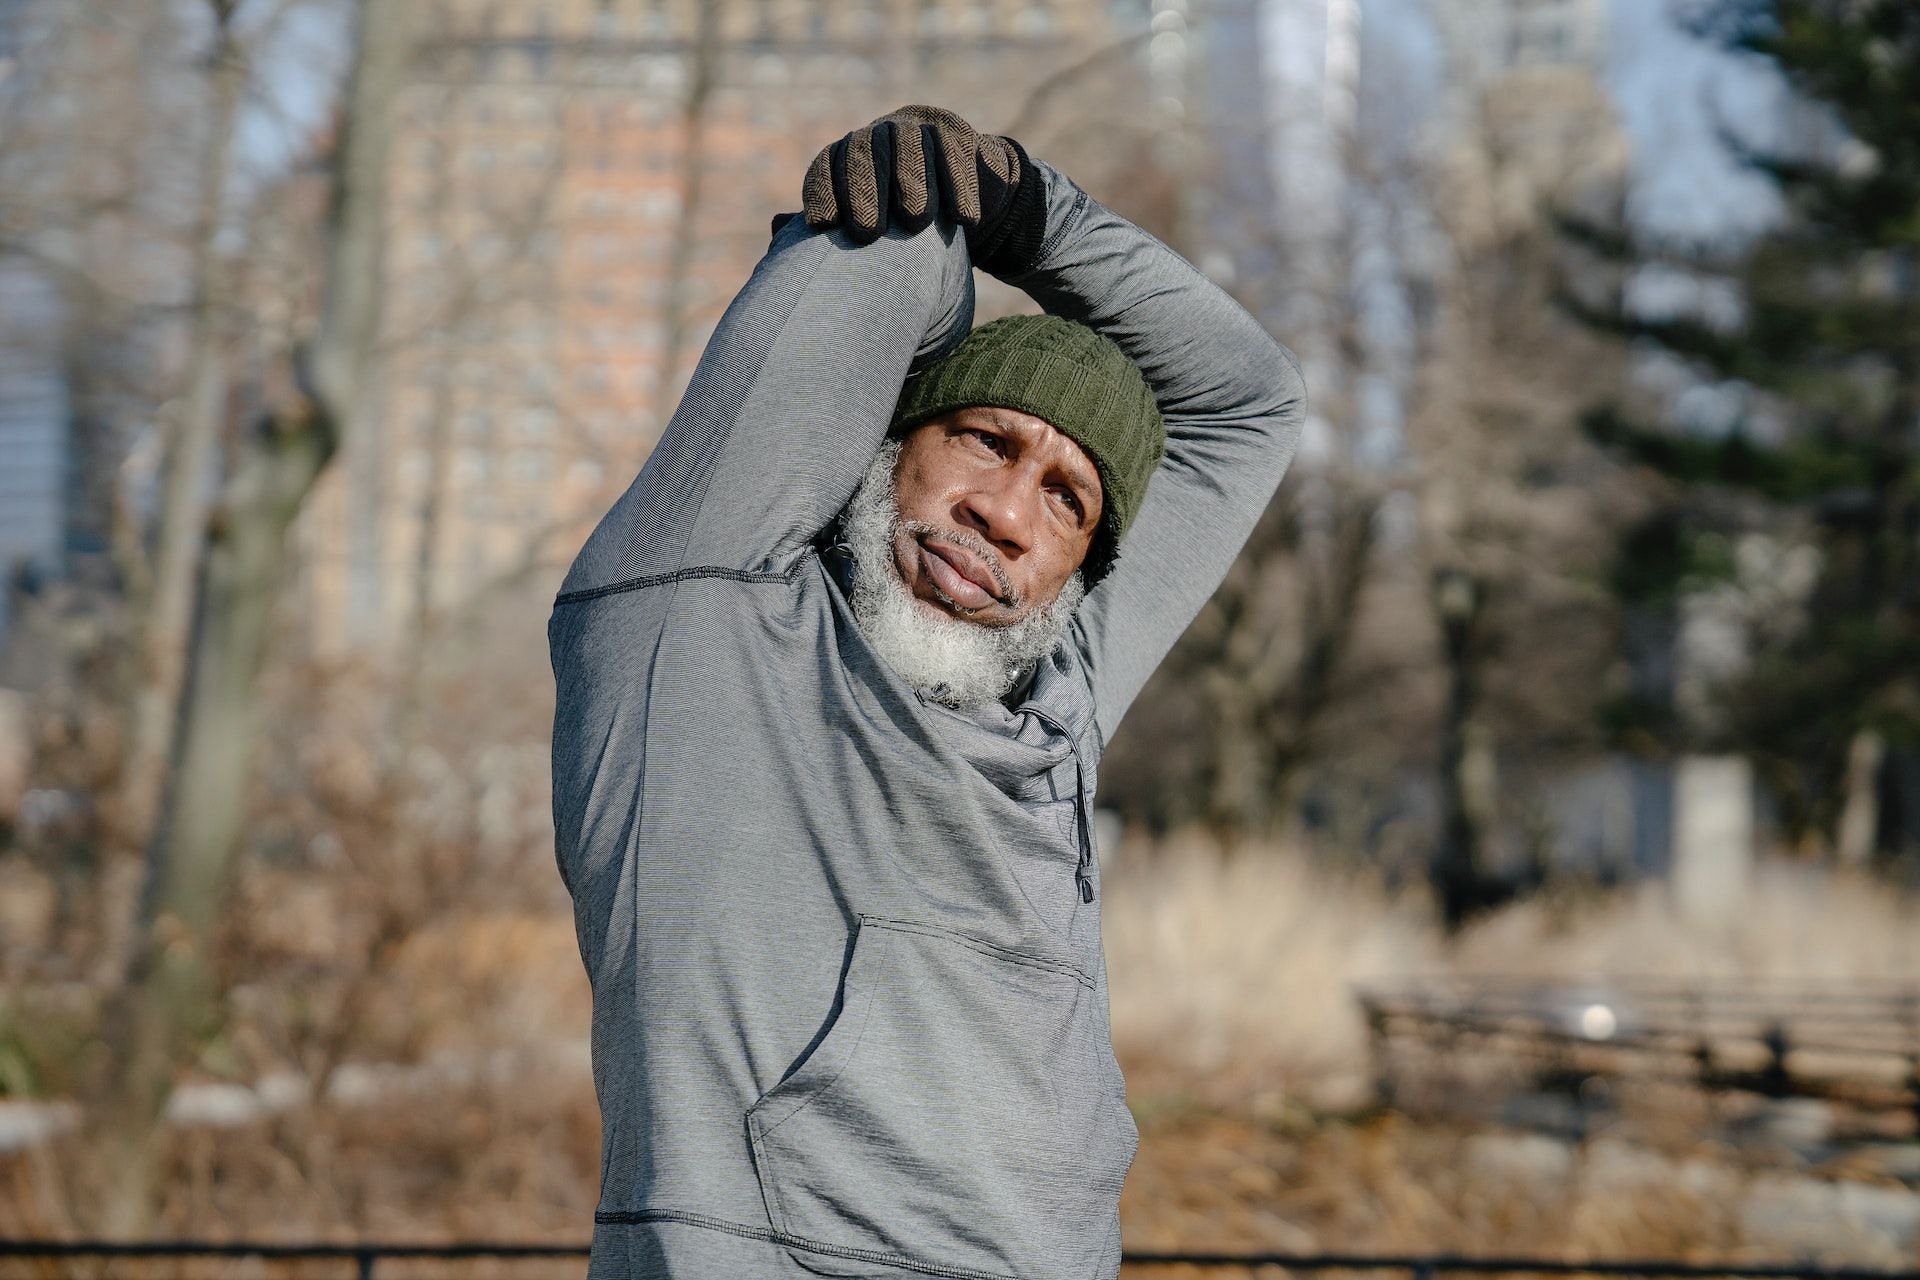 Chest stretch is an amazing stretching for seniors. (Photo via Pexels/Barbara Olsen)